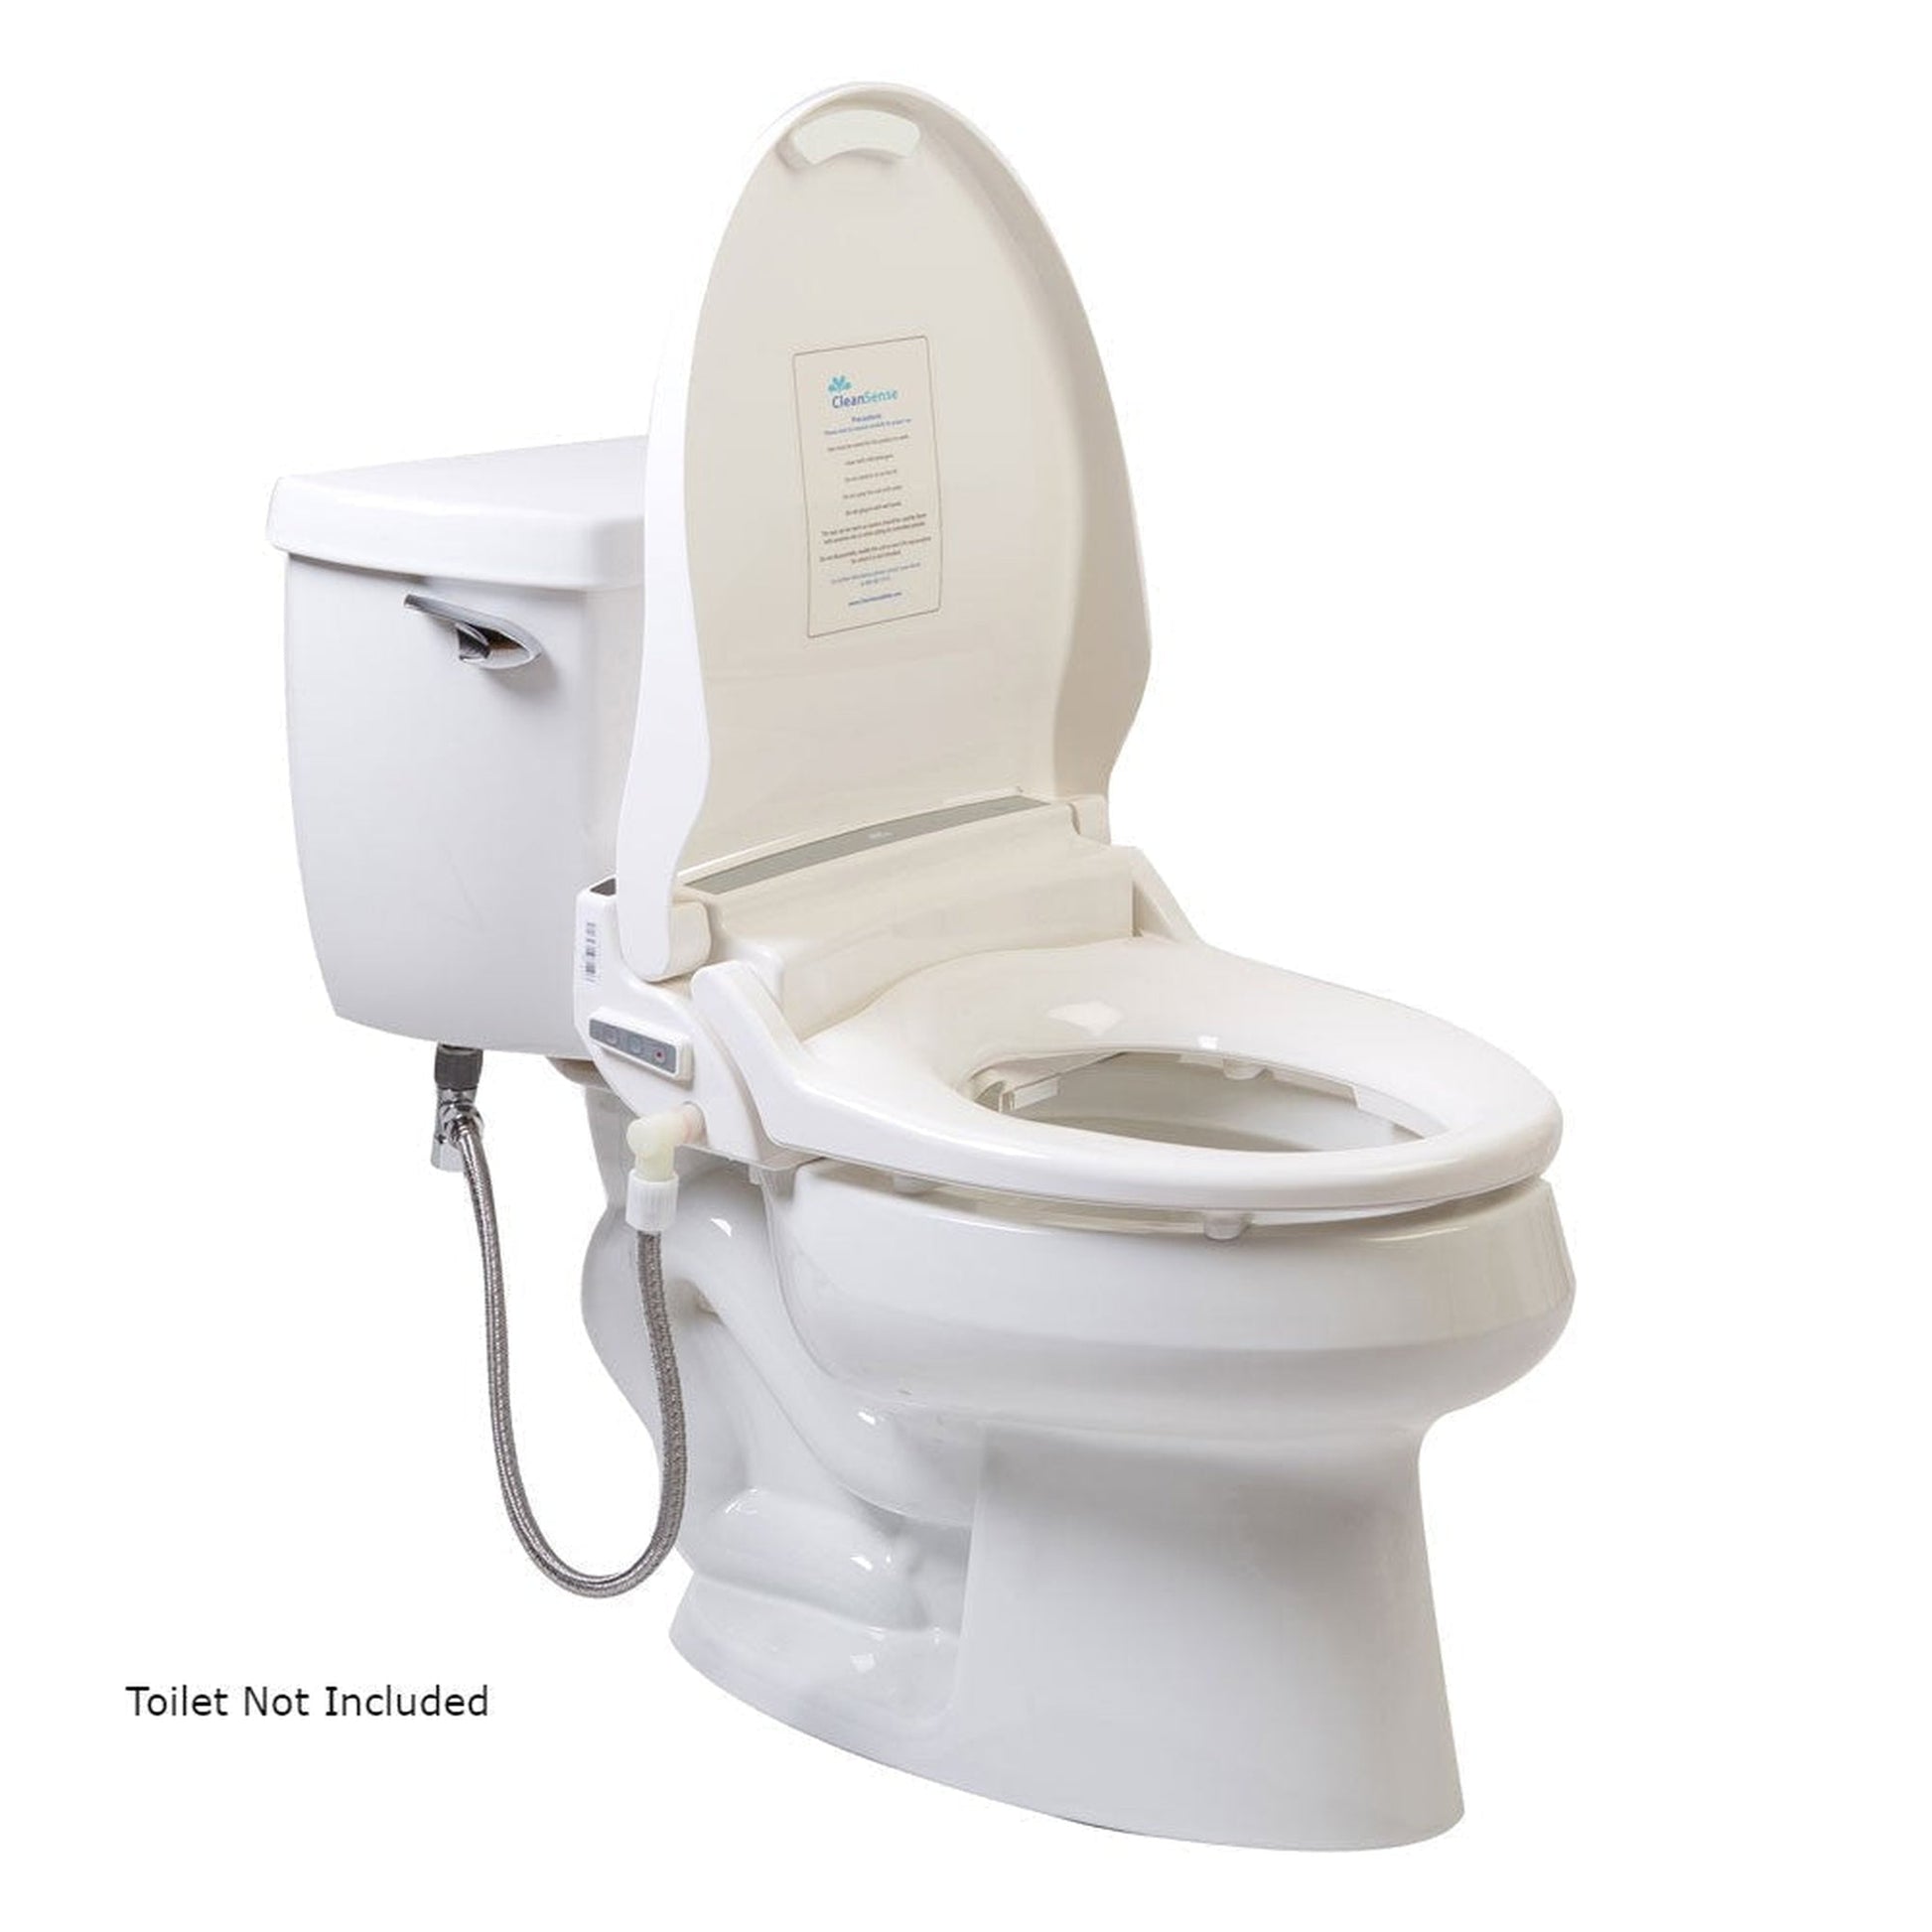 CleanSense DIB-1500R-RW-220 White Advanced Round Bidet Seat With LCD Remote Control and Energy Efficient Water Heating System 220V